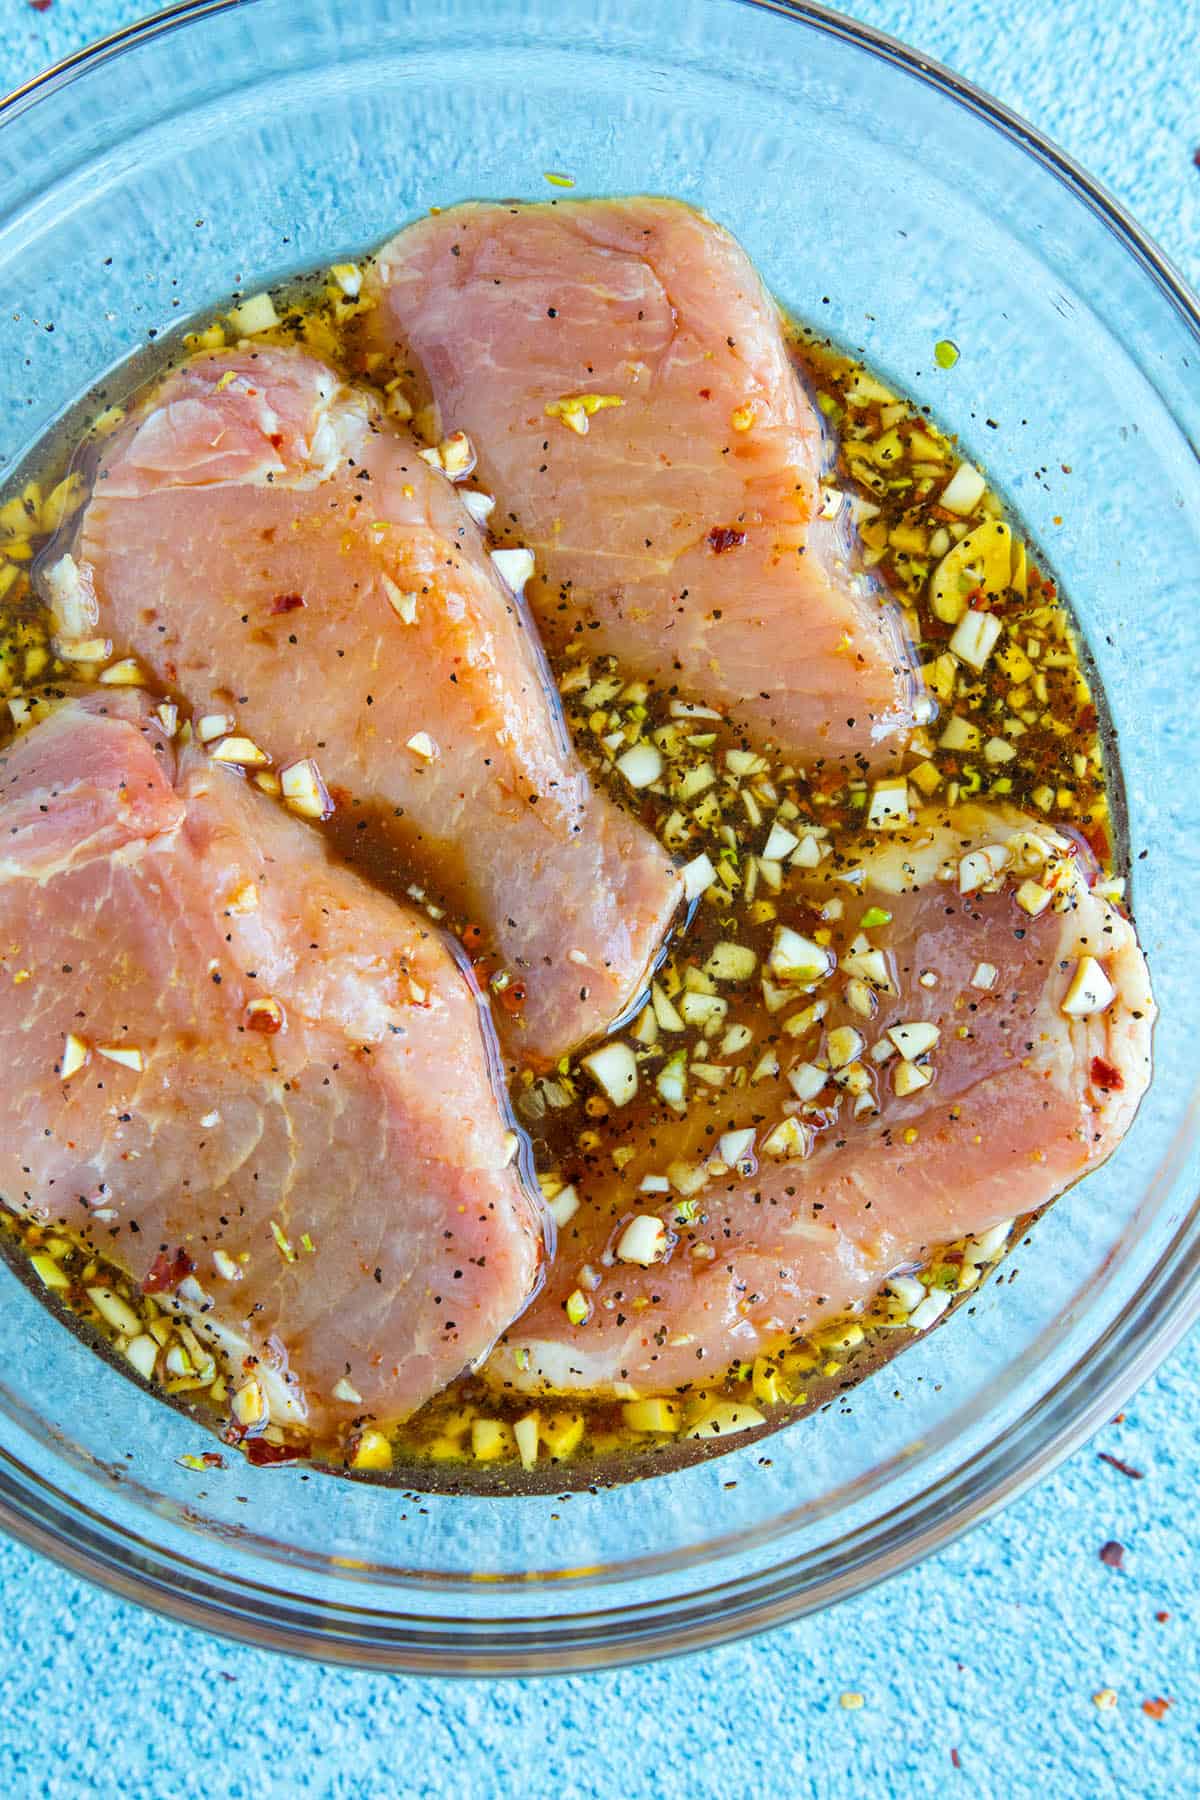 Marinating the pork chops in a bowl